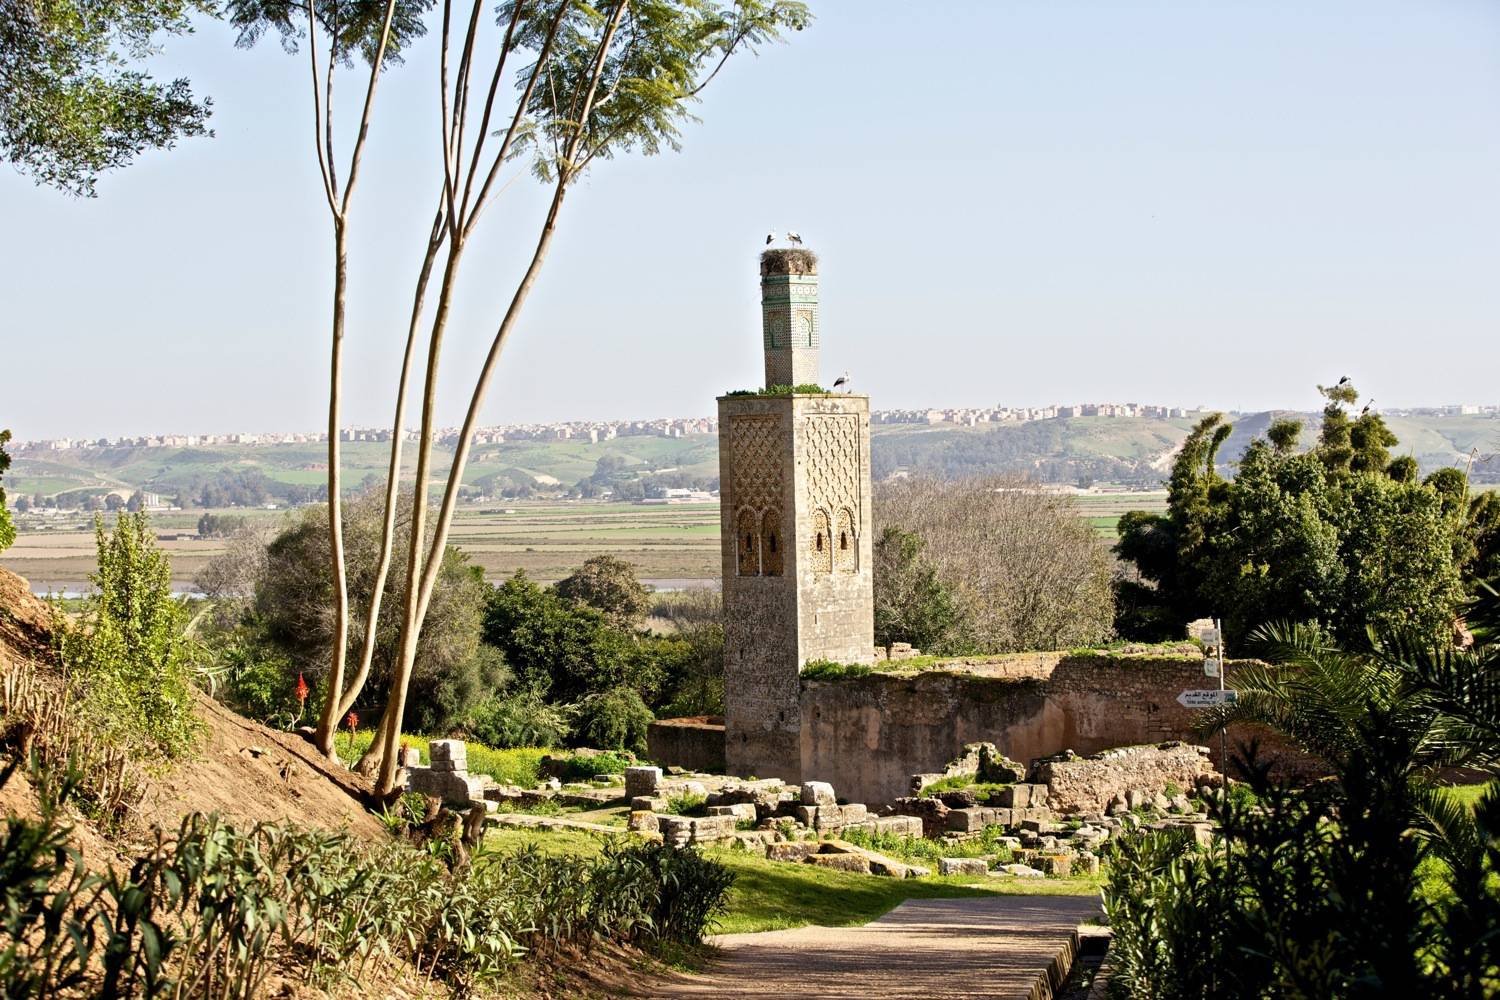 General view of the ruins, mosque and minaret looking toward the Bouregrag River